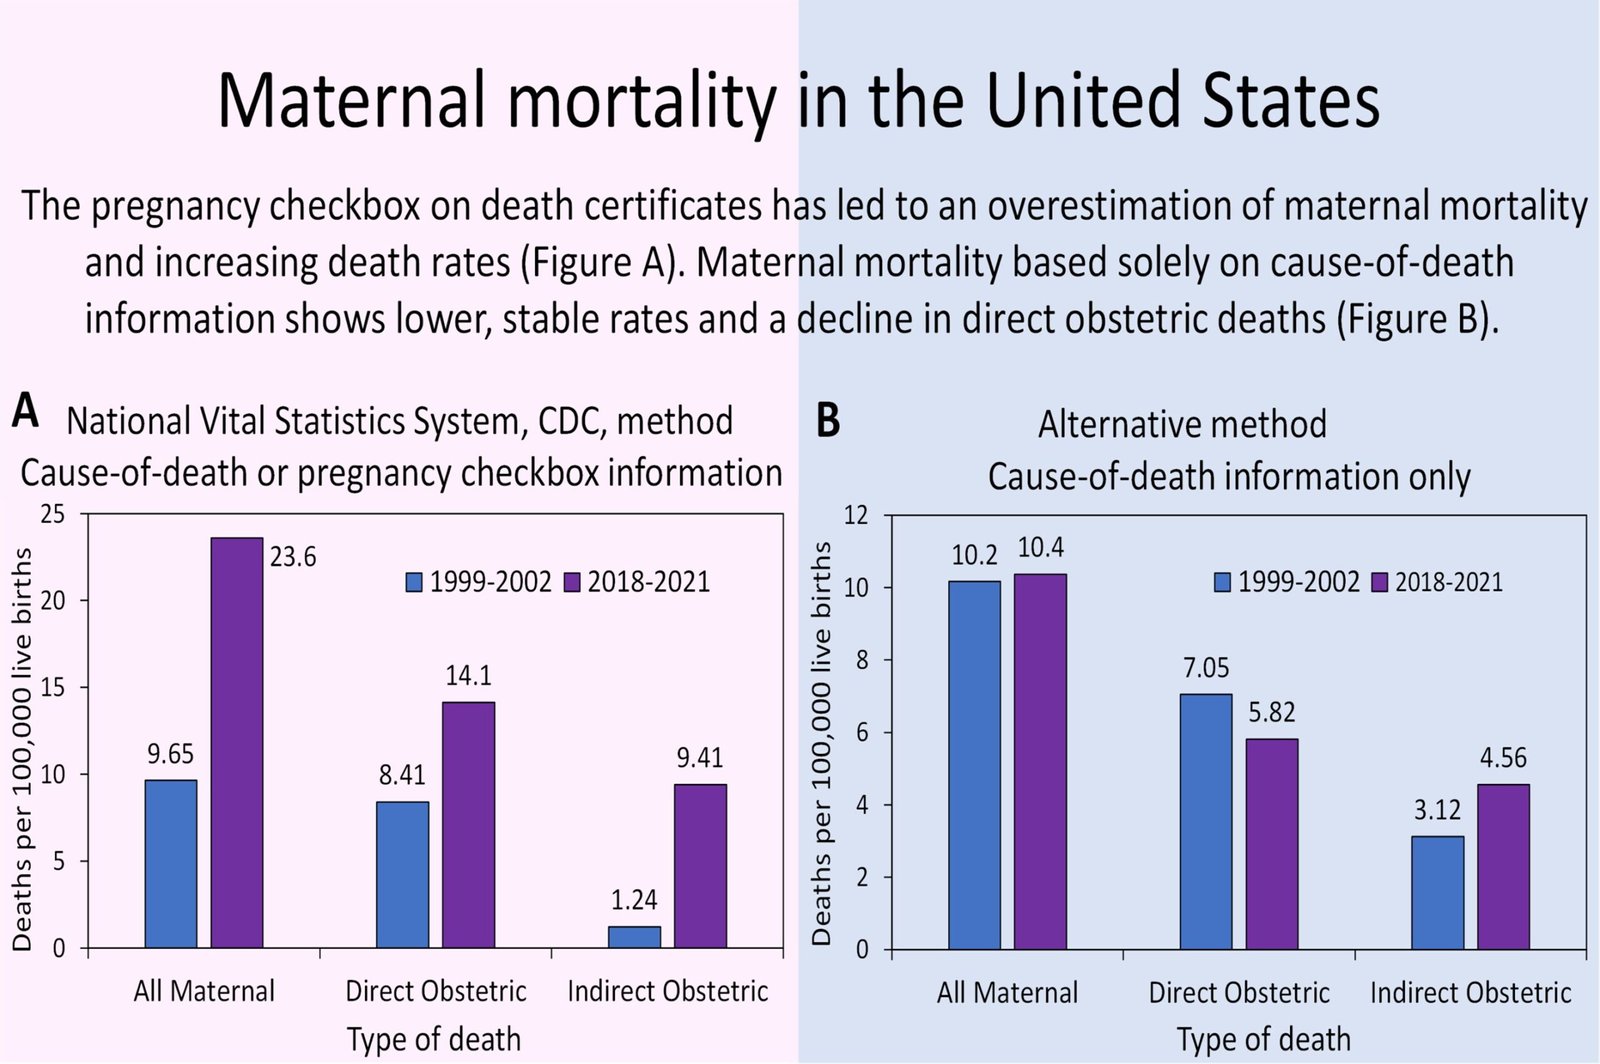 The US maternal death rate is stable, not skyrocketing, as reported